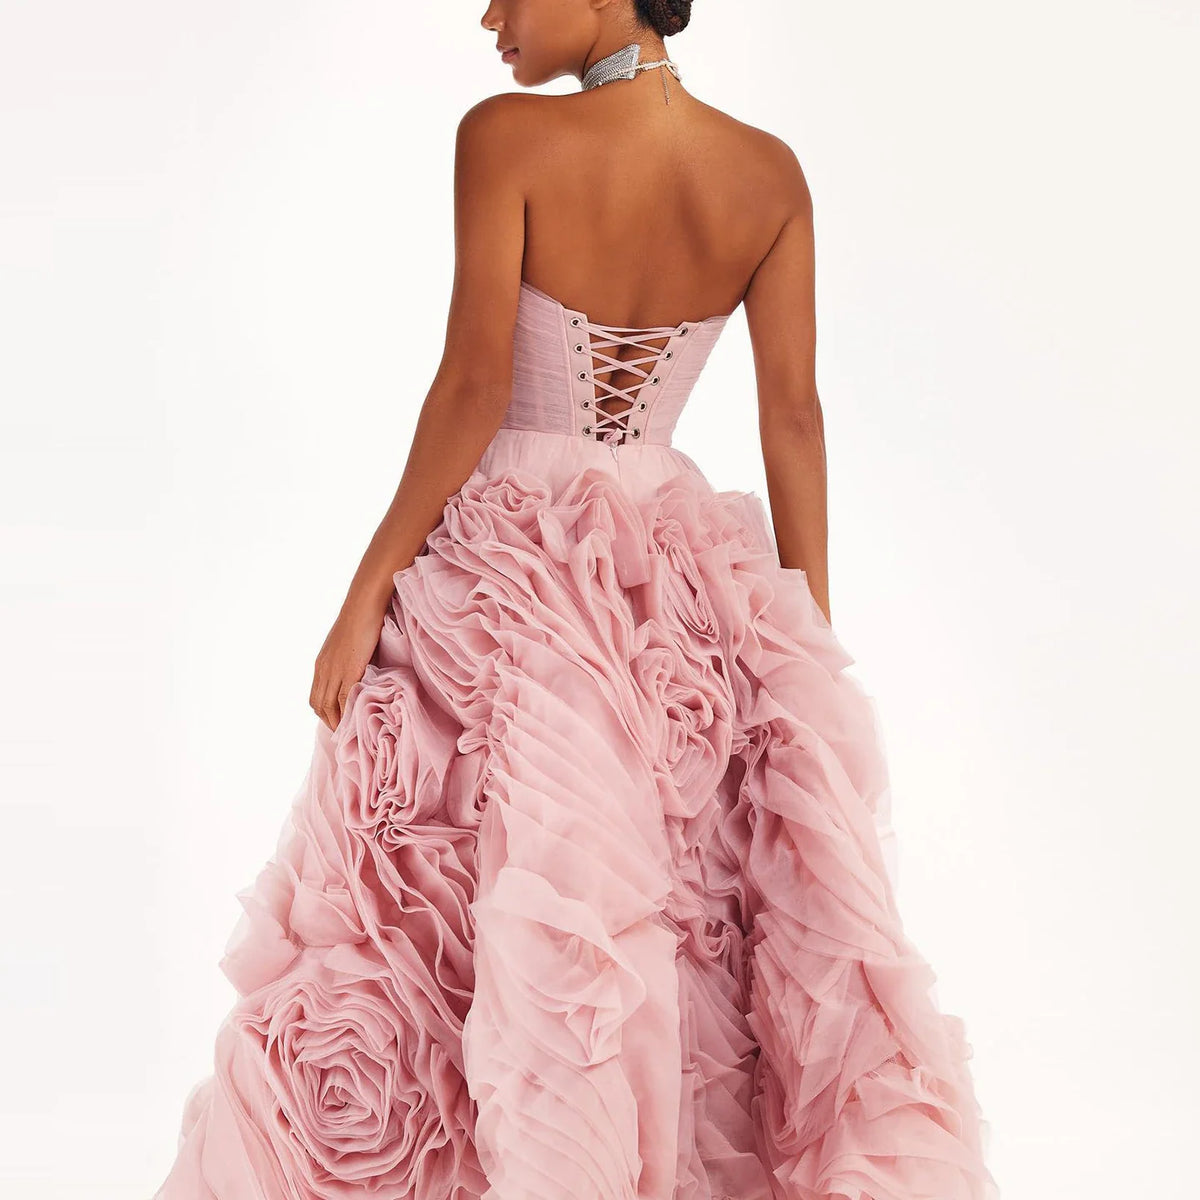 Dreamy Vow Luxury 3D Rose Flower Pink Short Evening Dresses for Women Wedding Party 2023 Strapless Midi Formal Prom Gowns 343